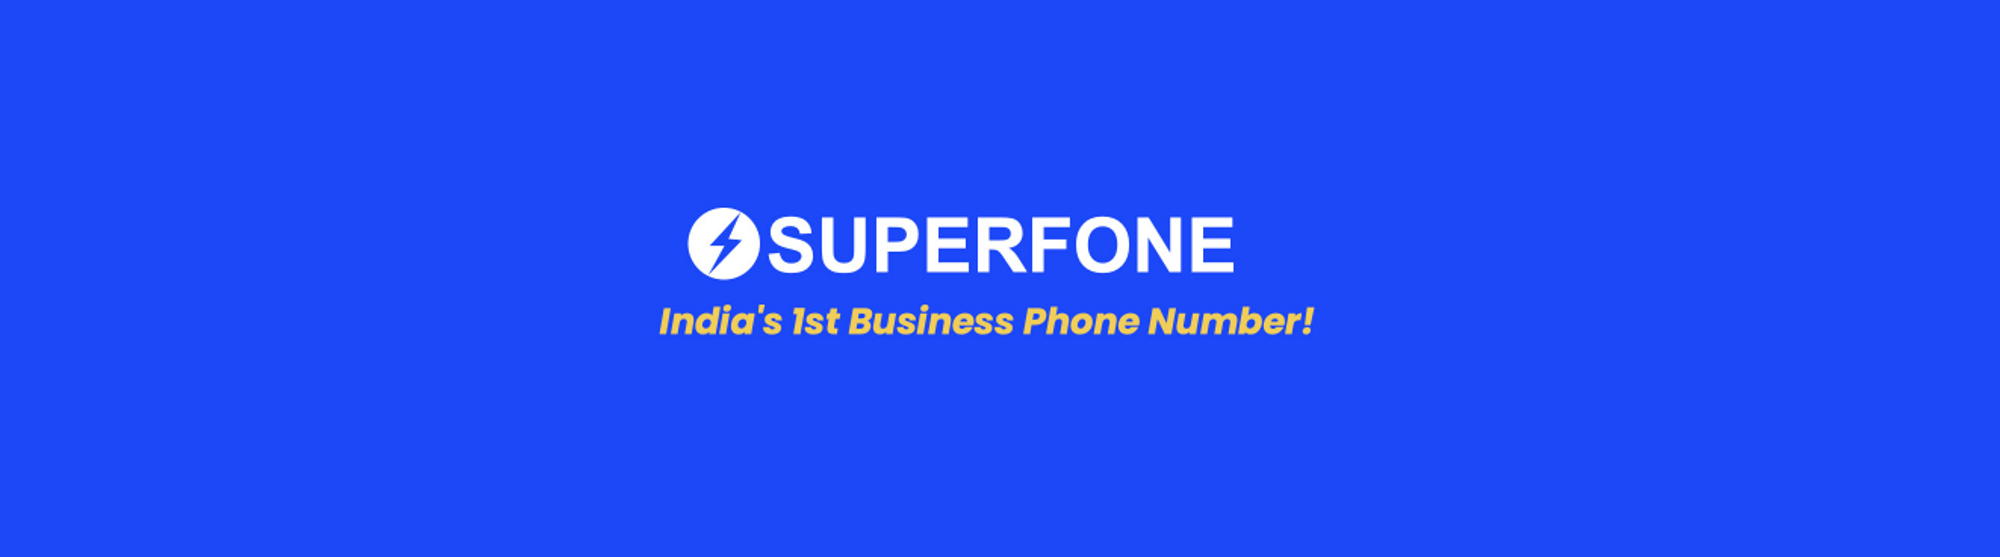 Superfone Cover Image